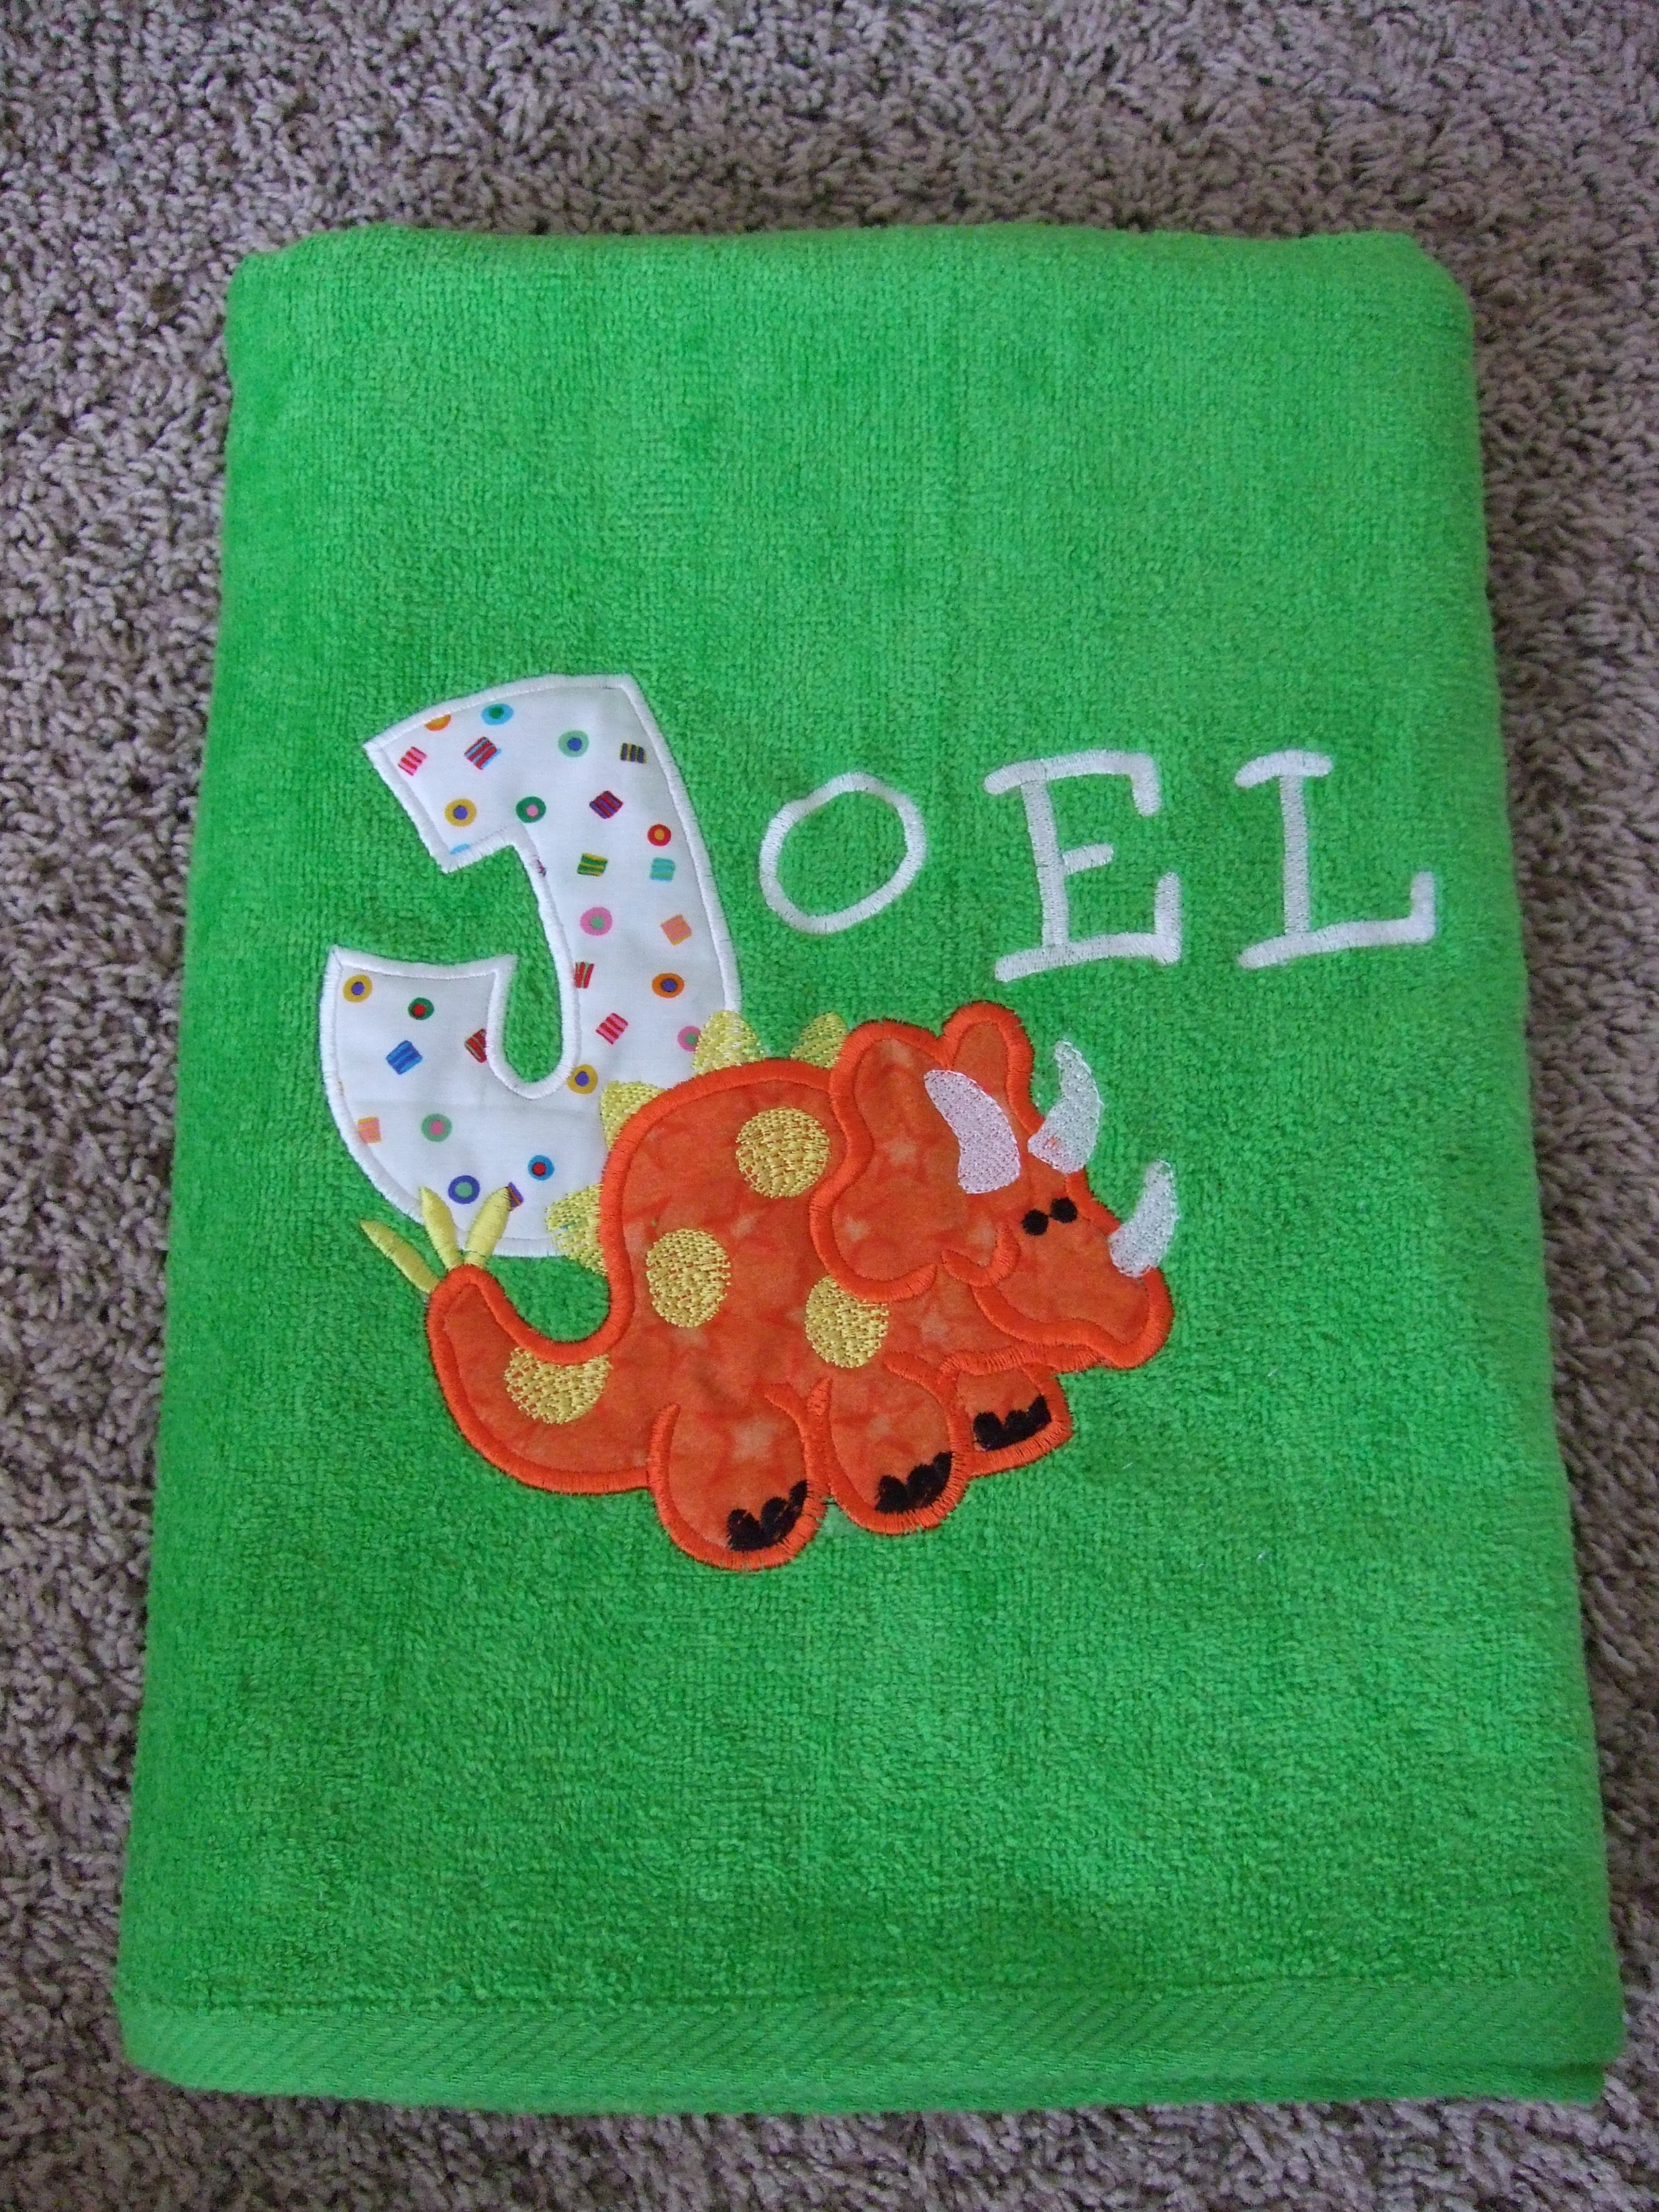 personalized towel and shirt